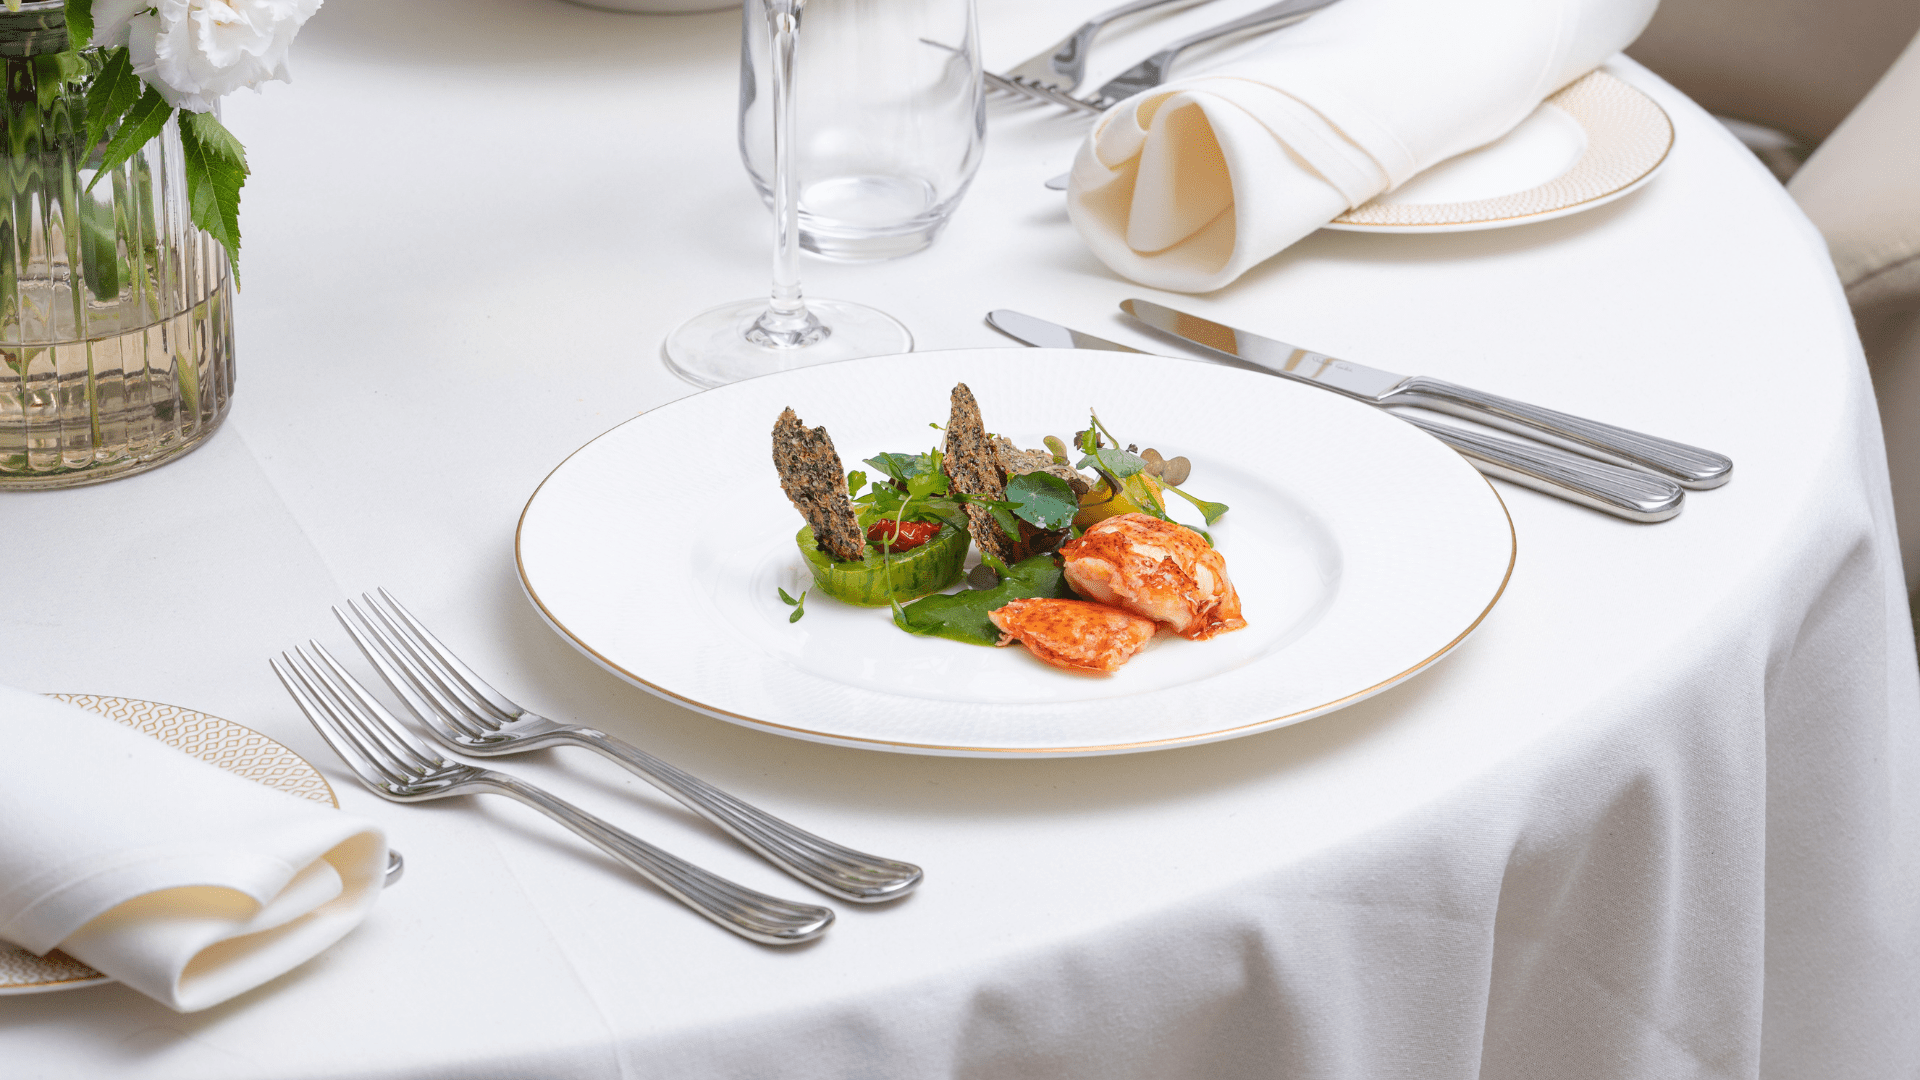 Private Fine Dining Experiences At The Vines Restaurant | Carden Park